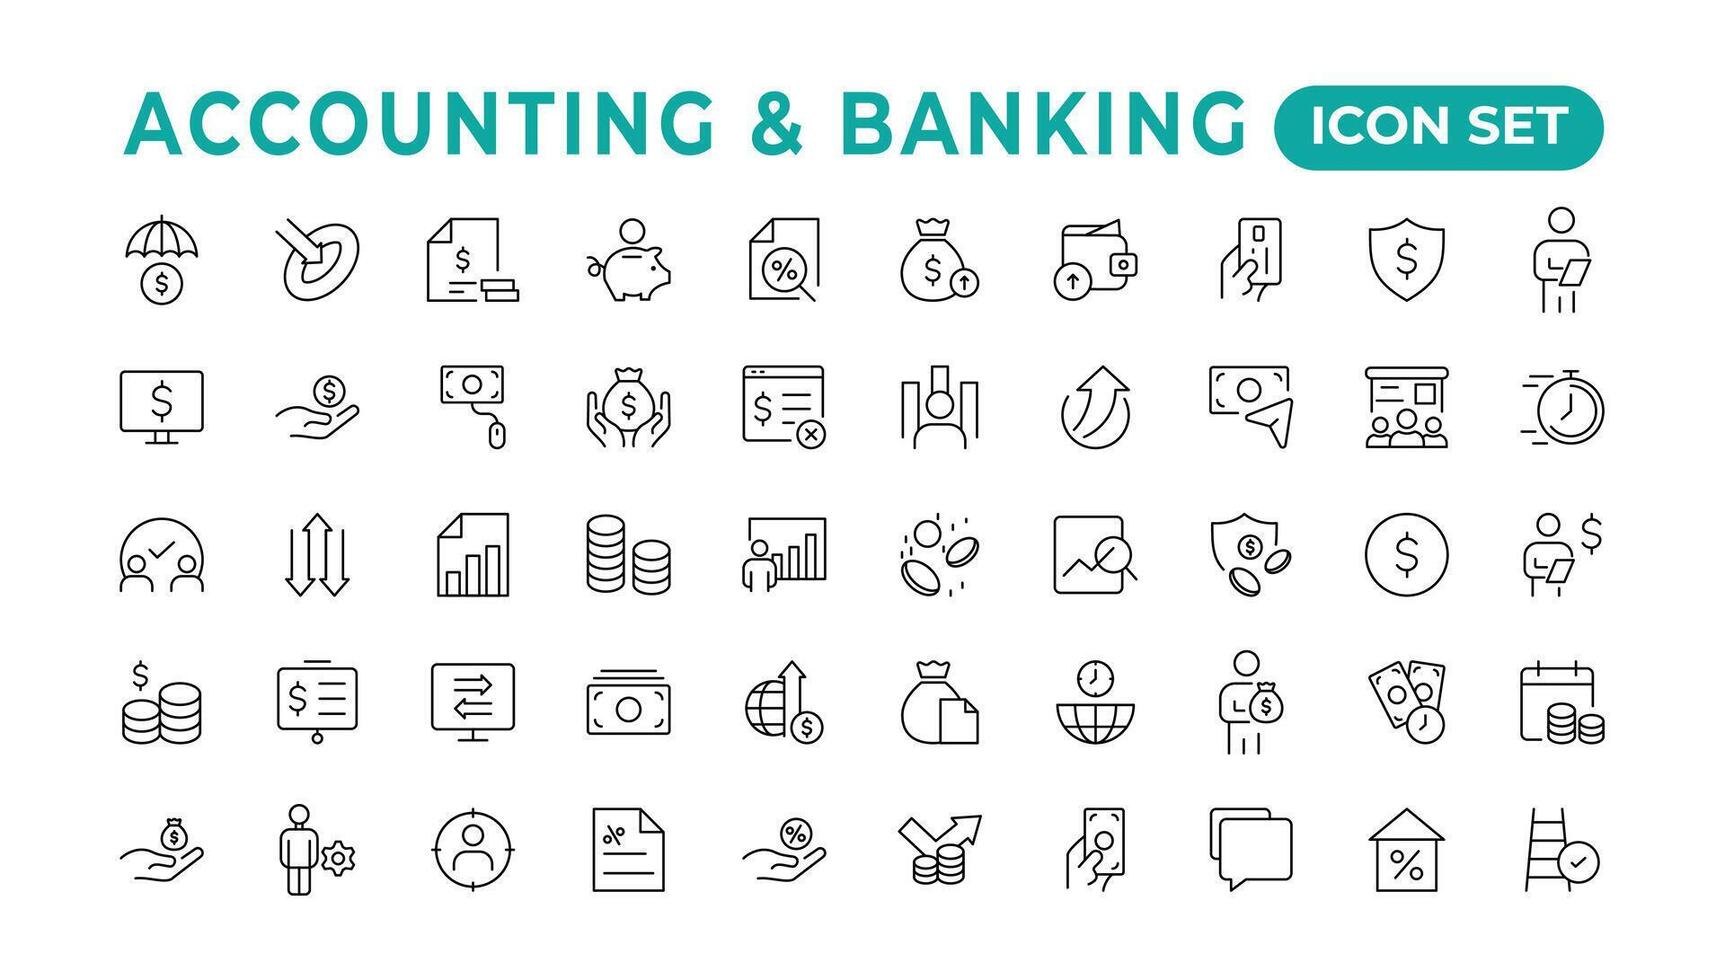 Set of line icons related to accounting, audit, and taxes. Outline icon collection. Businesssymbols.Income set. Containing money, tax, earnings, payment,paycheck, work, pension, and wages icons. vector